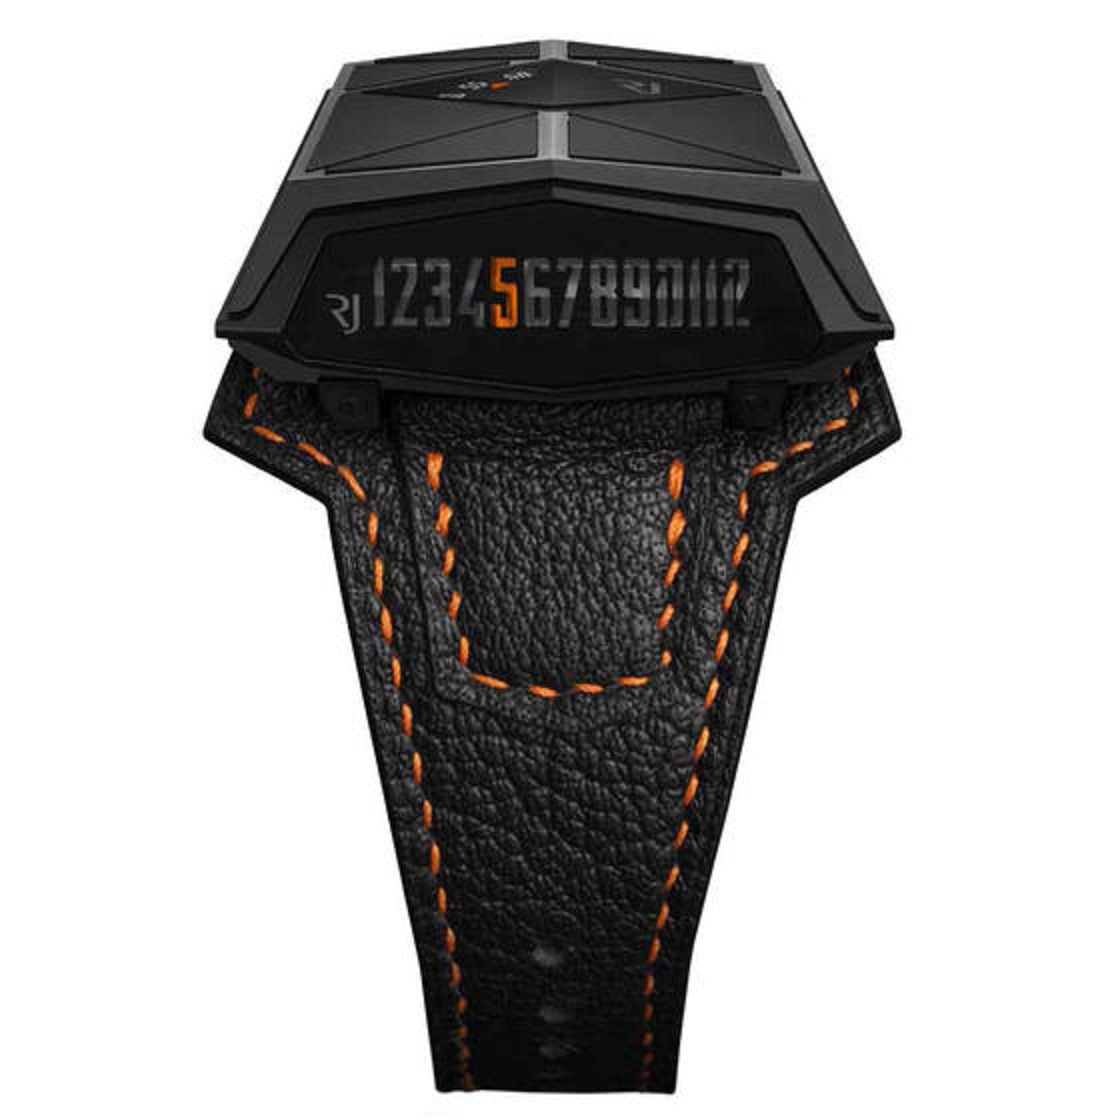 Spacecraft in Black PVD Titanium - Limited to 25 pcs on Black Leather Strap with Black Dial